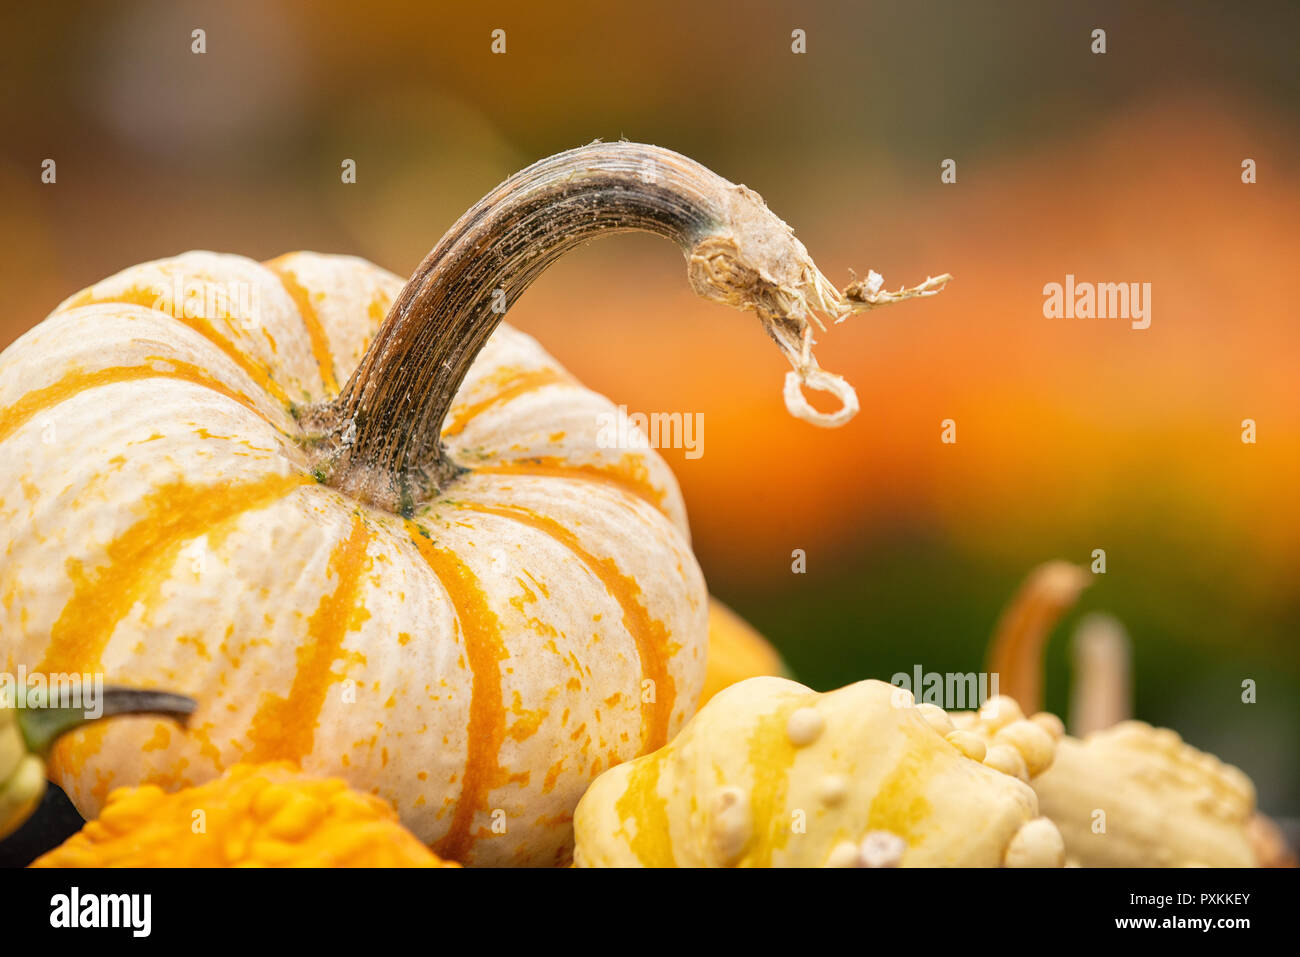 Closeup of Mini Tiger Striped pumpkin against autumn colors. Gourds in the foreground. Copy space. Stock Photo